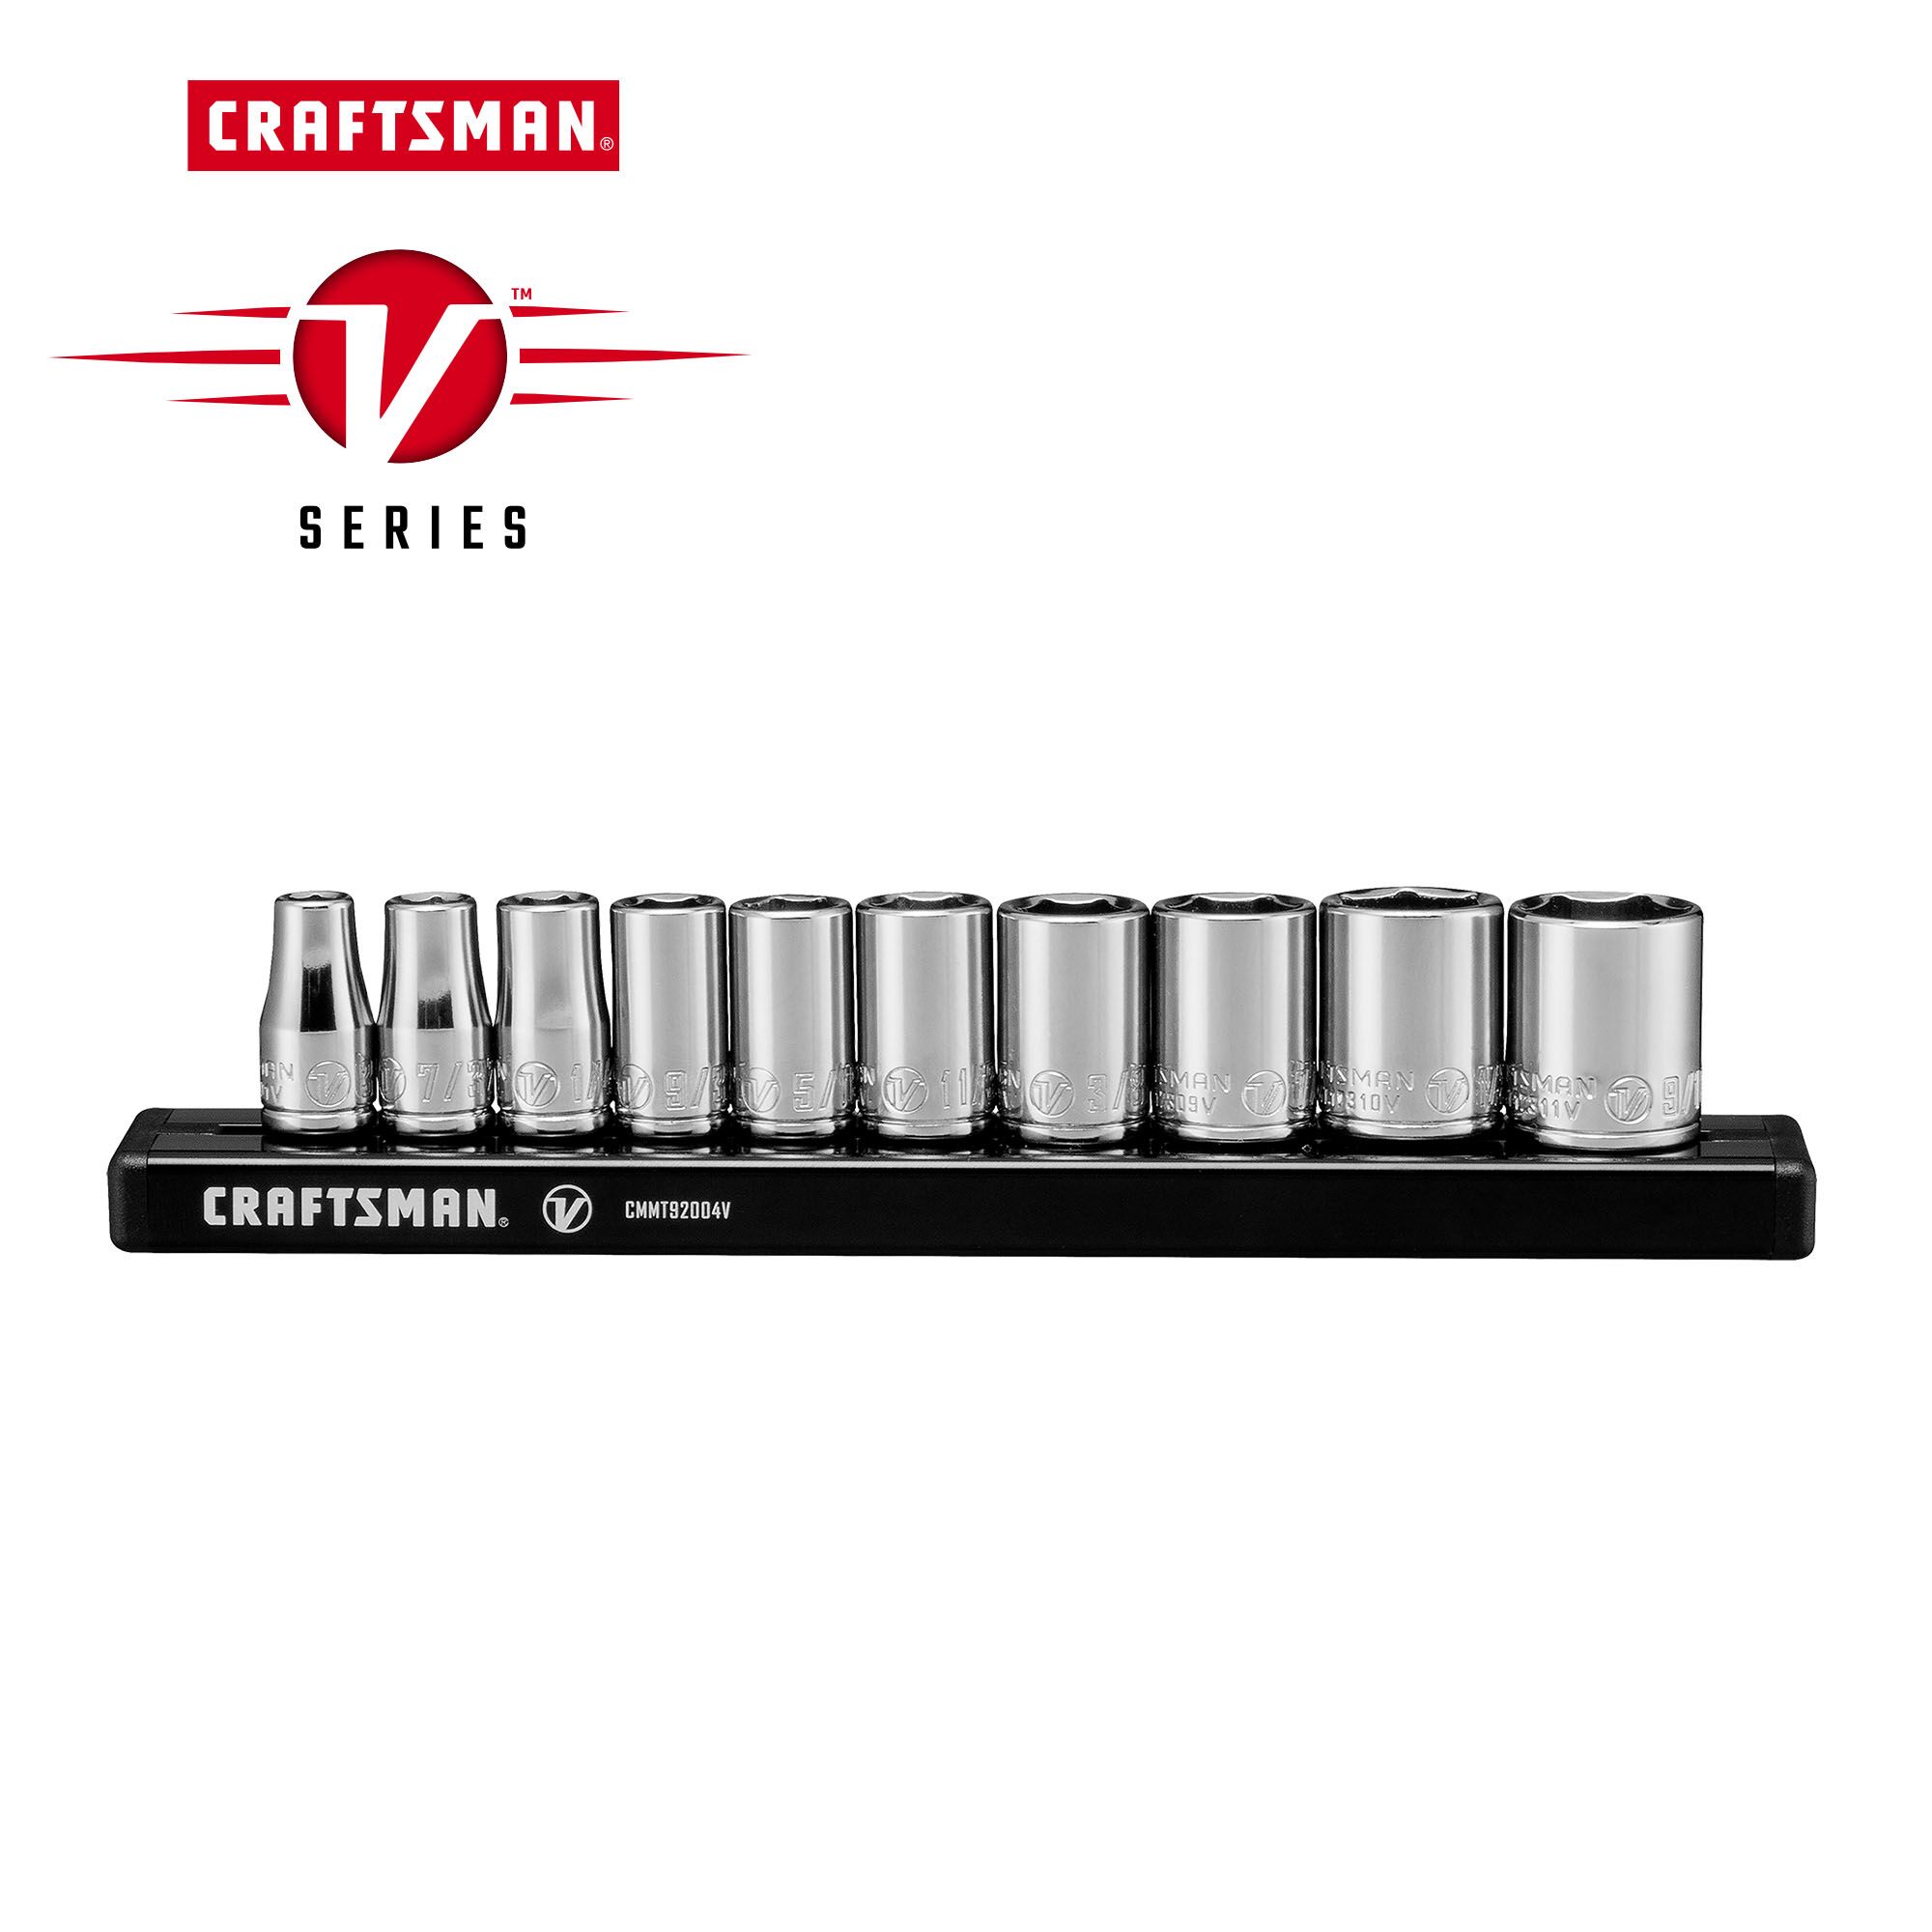 Graphic of CRAFTSMAN Sockets: 6-Point highlighting product features